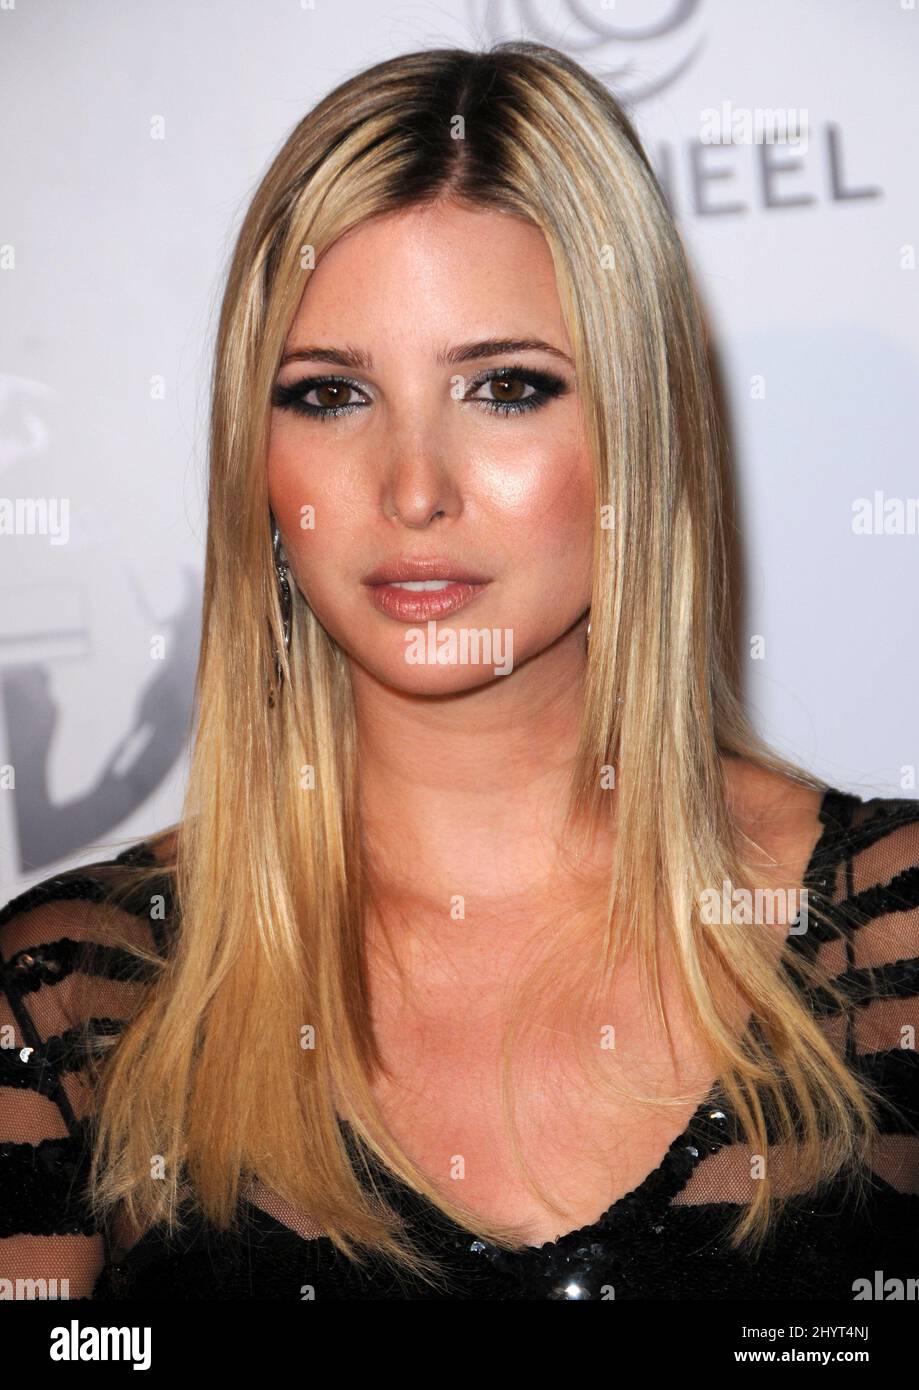 Ivanka Trump at the Trump and Nakheel event celebrating the Trump Tower Dubai at a Private Residence in Bel Air. Stock Photo